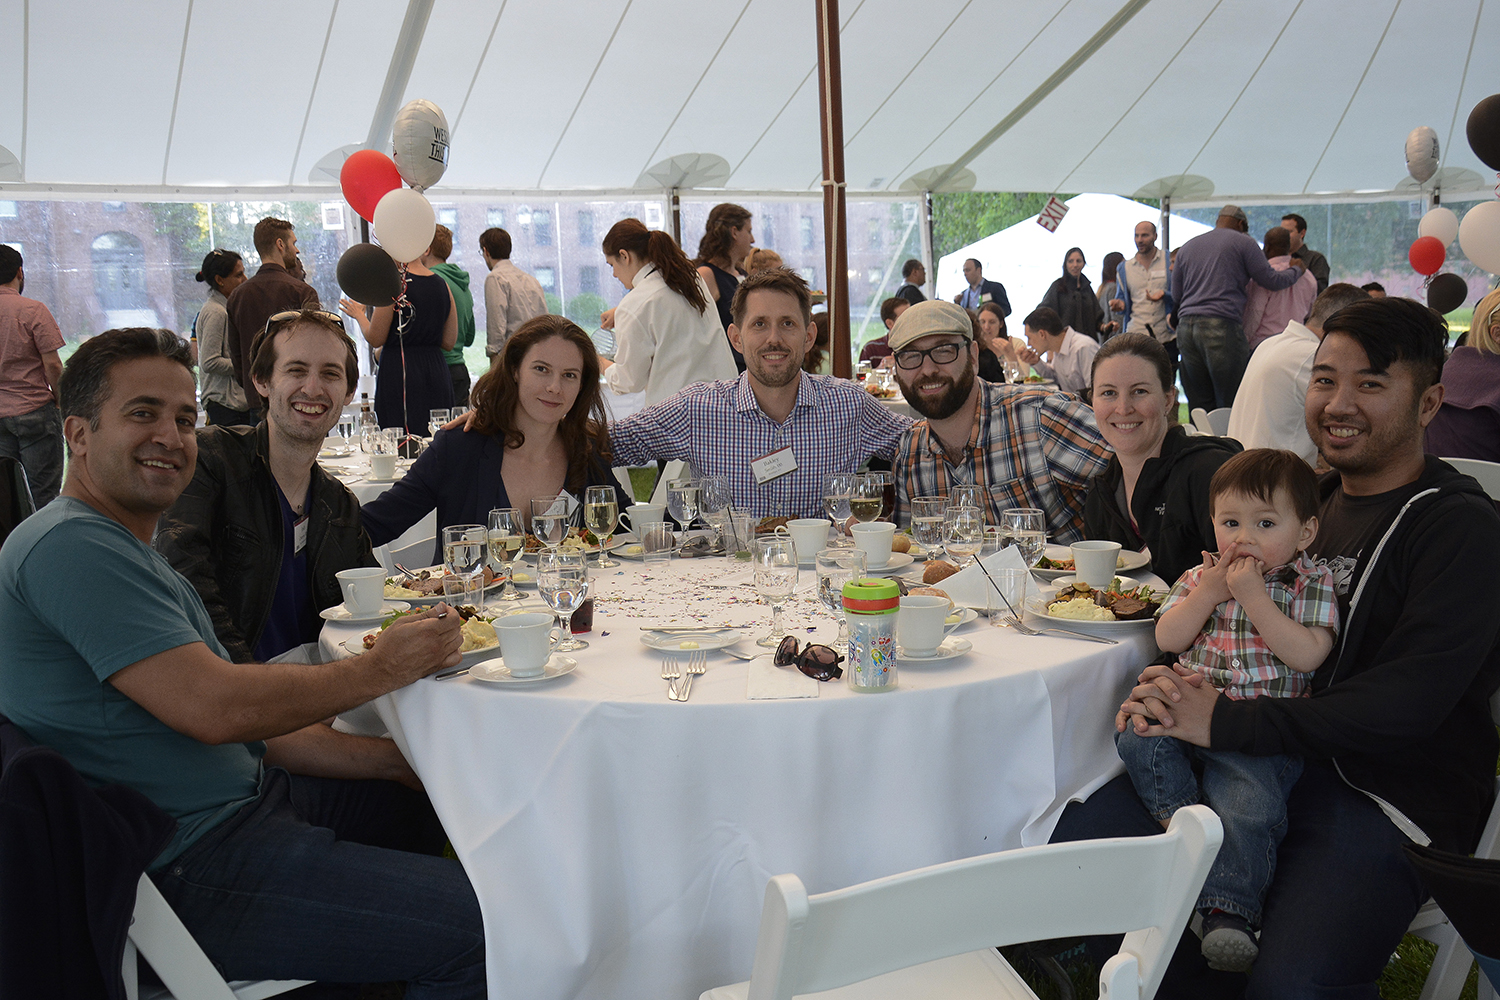 Members of the Class of 2000 gathered for a reception and dinner on the North College Lawn on May 23. (Photo by John Van Vlack)